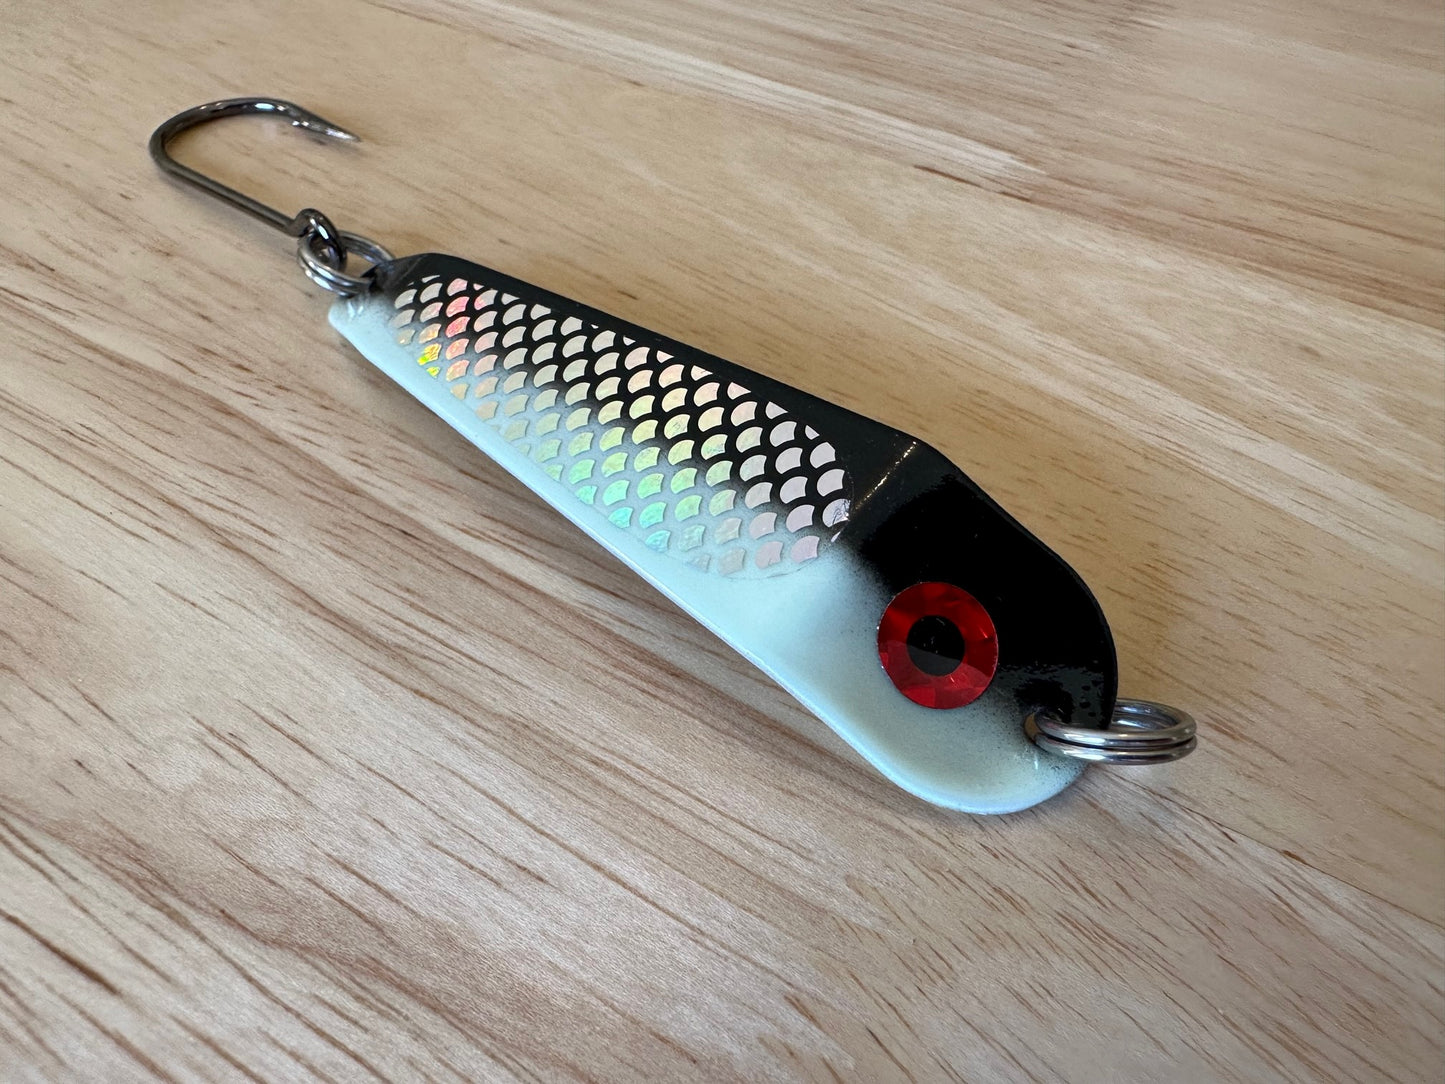 How to Catch Fish using Spoon, Make a Lure from Spoon